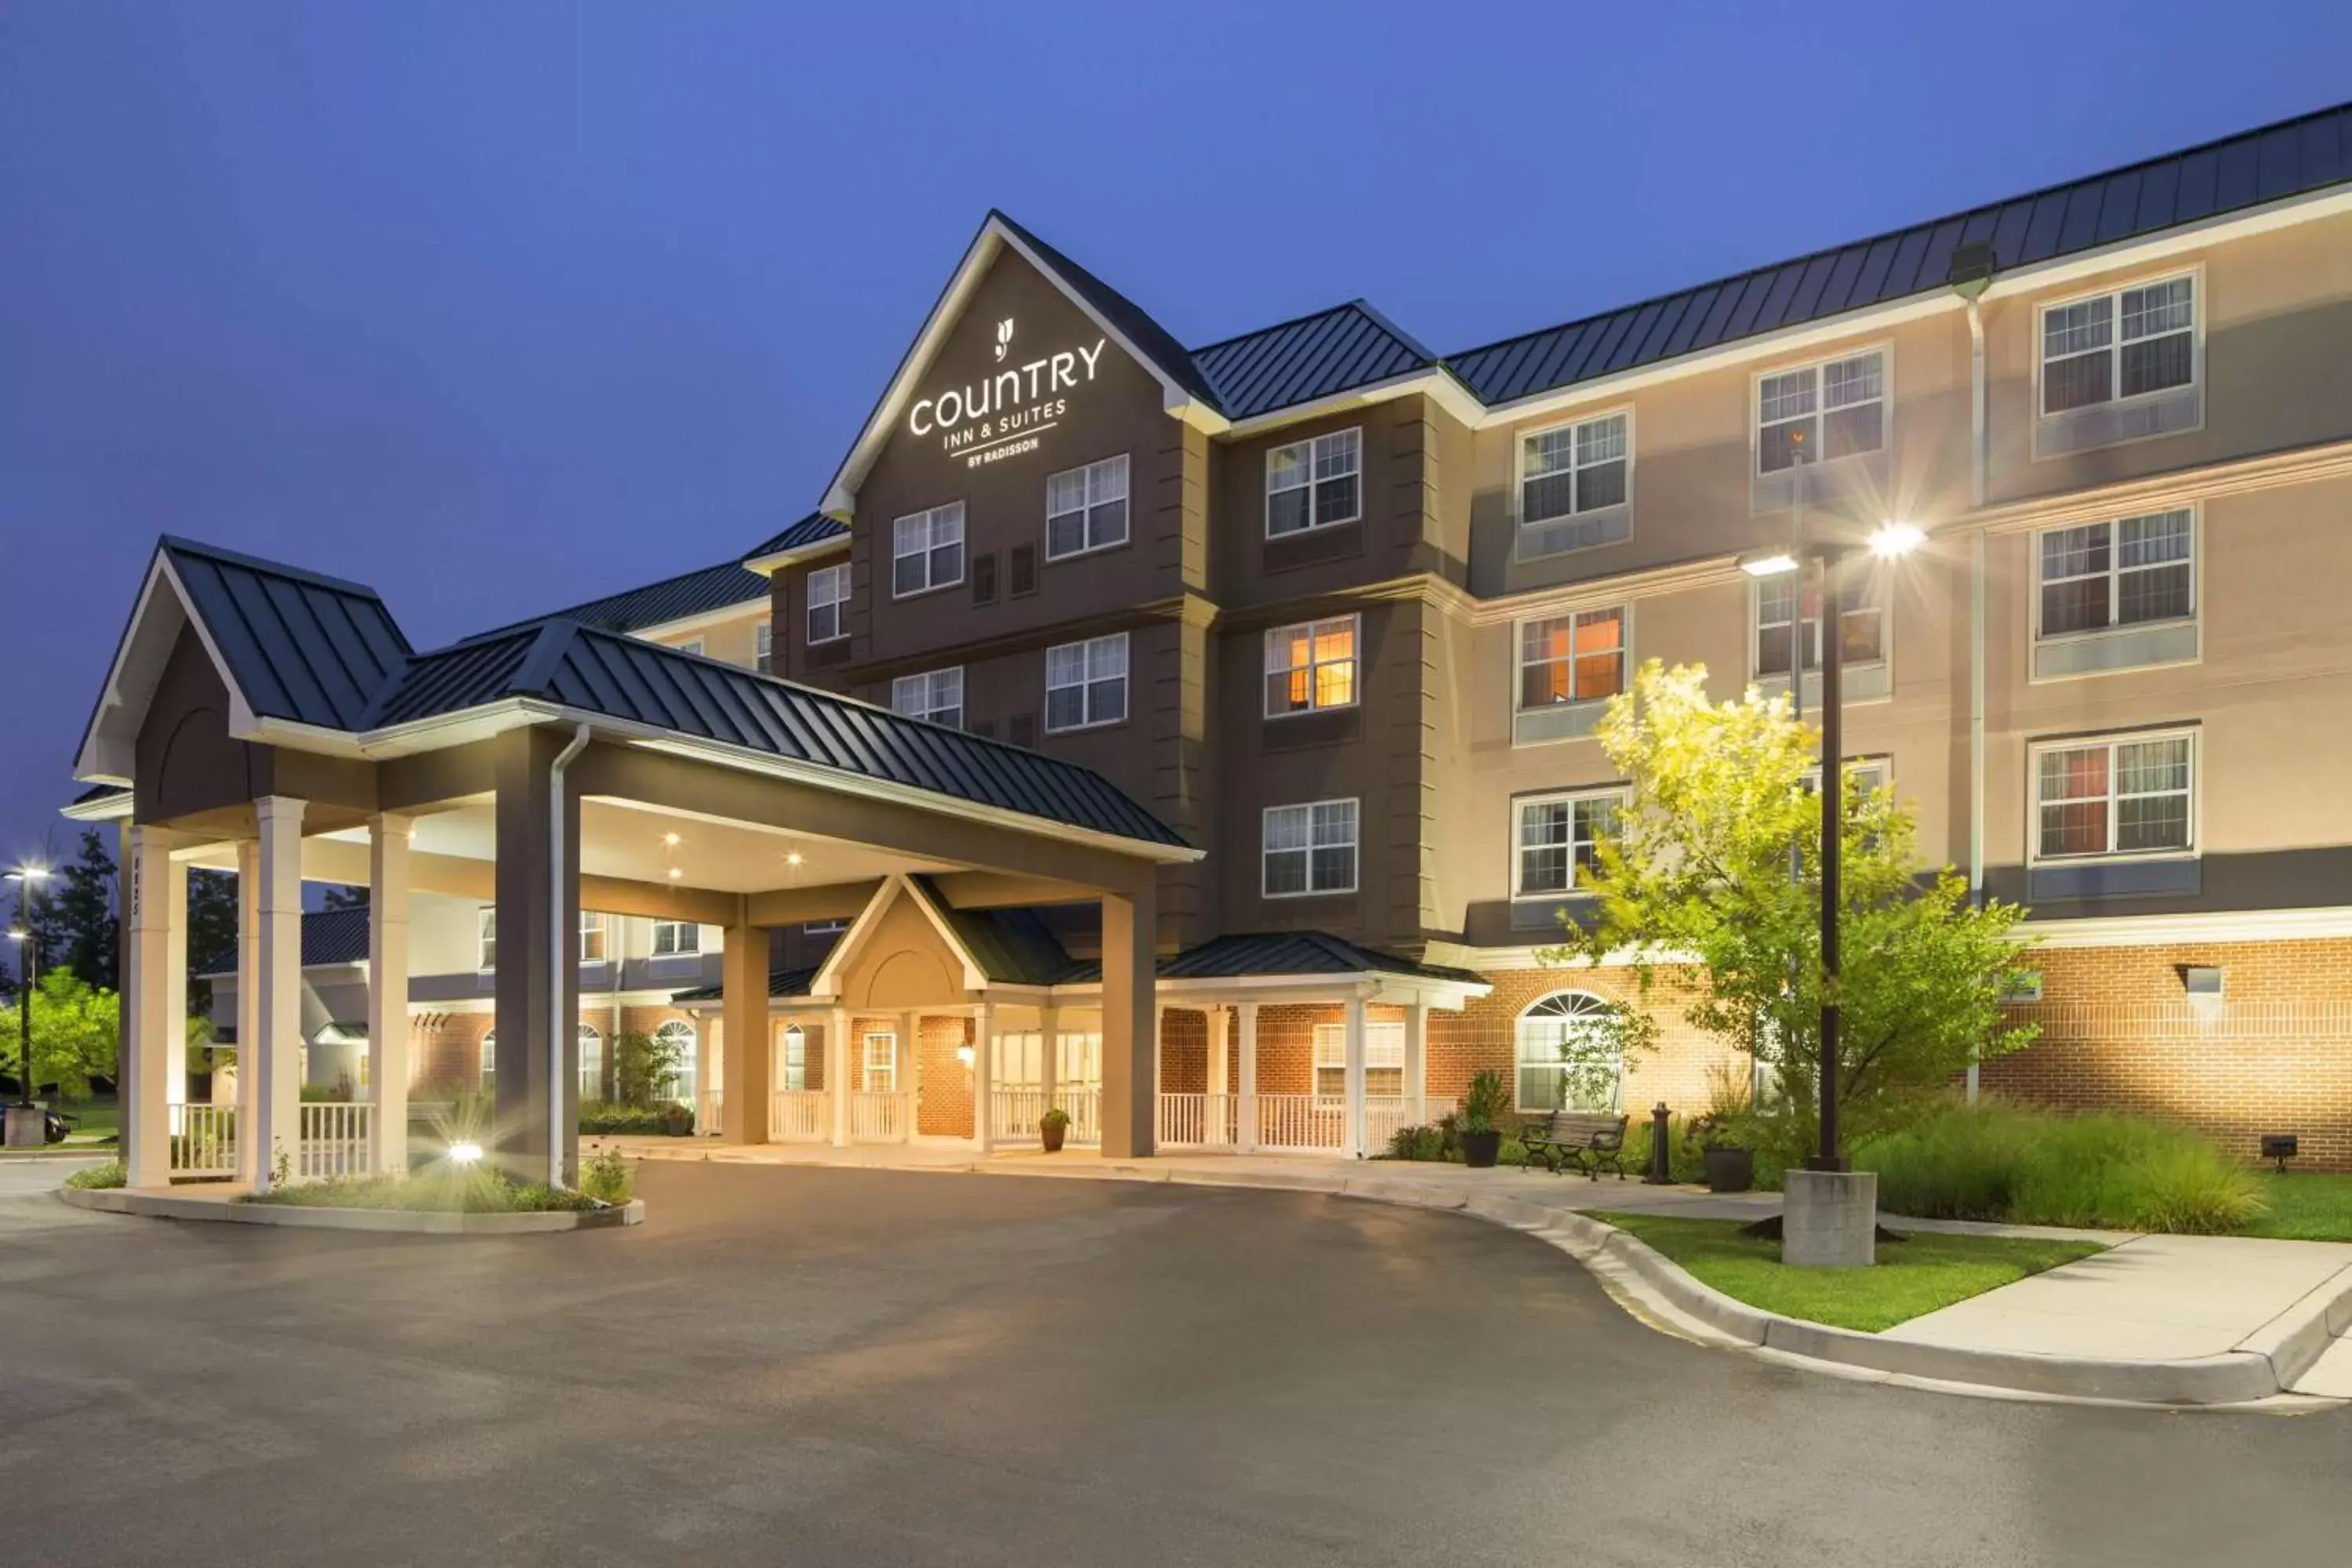 Property building in Country Inn & Suites by Radisson, Baltimore North, MD